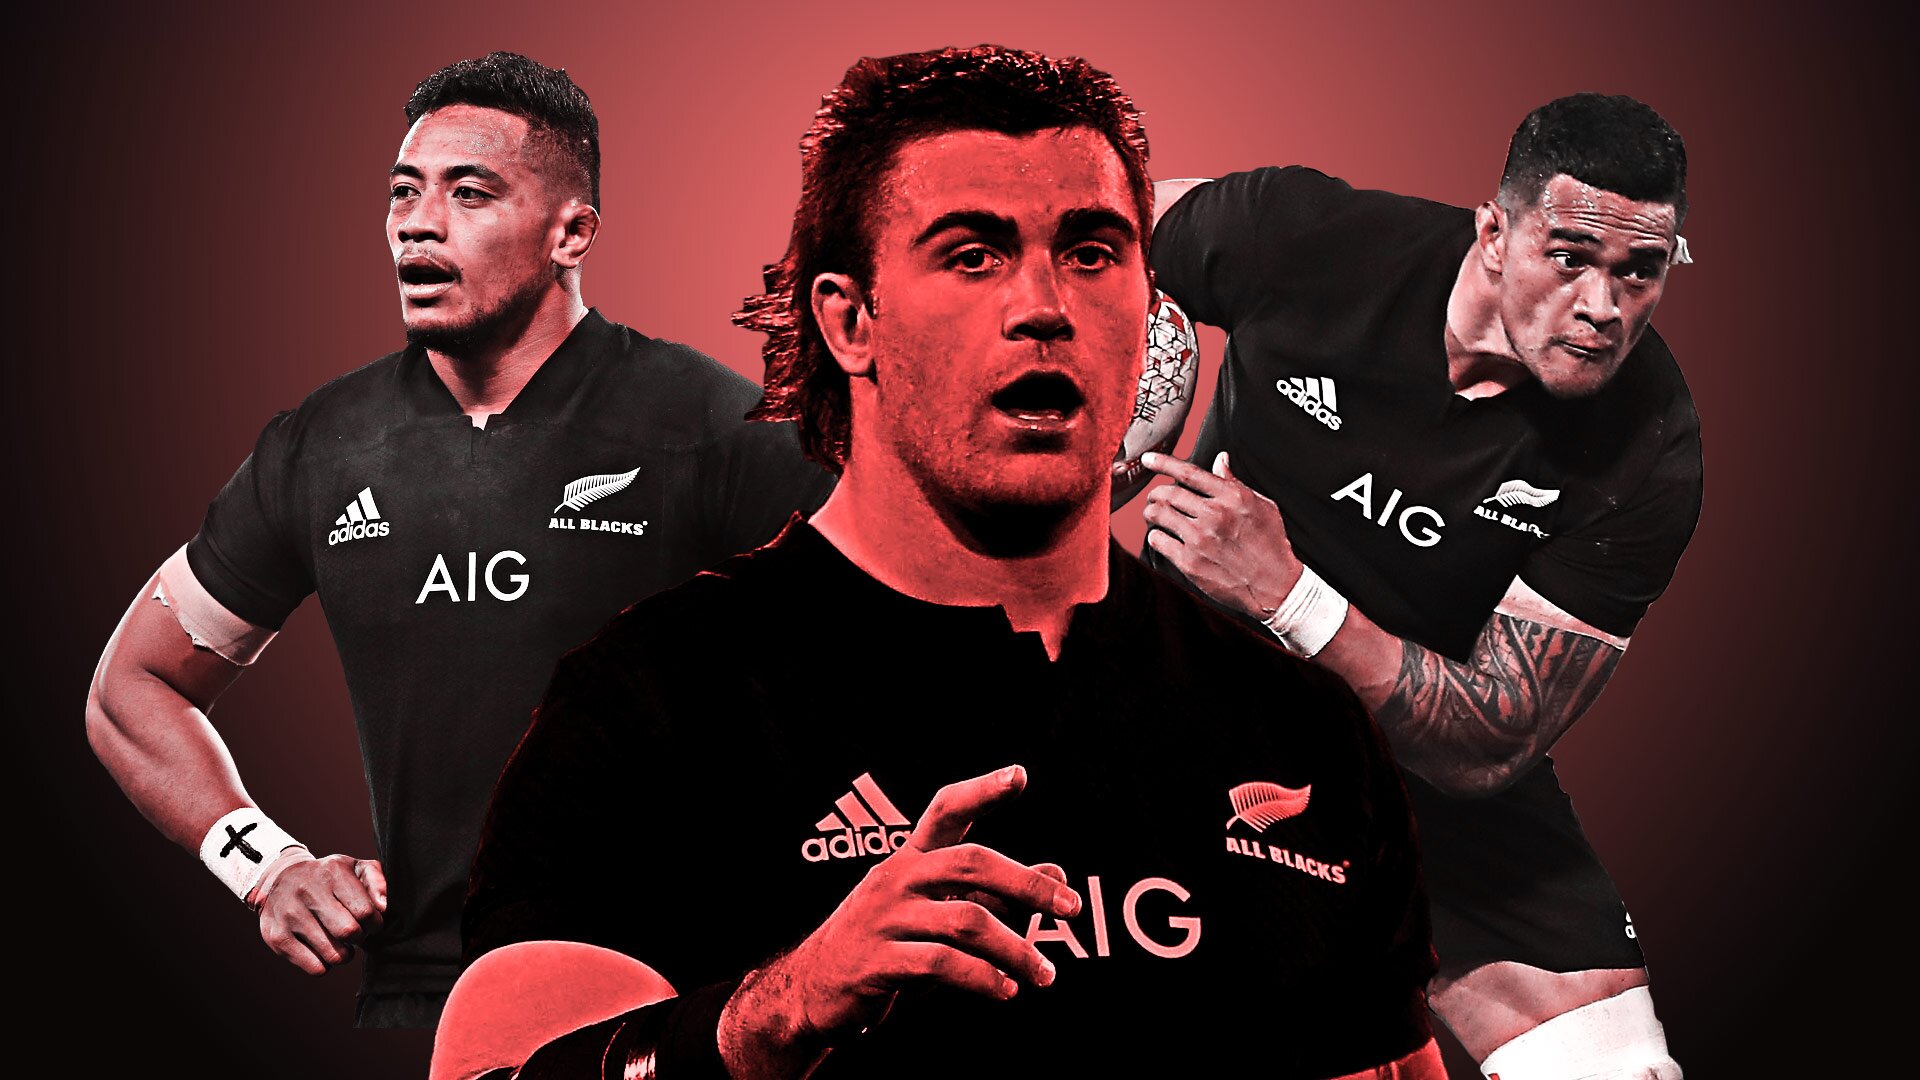 Blindsided: Is No. 6 the All Blacks' biggest World Cup question mark?